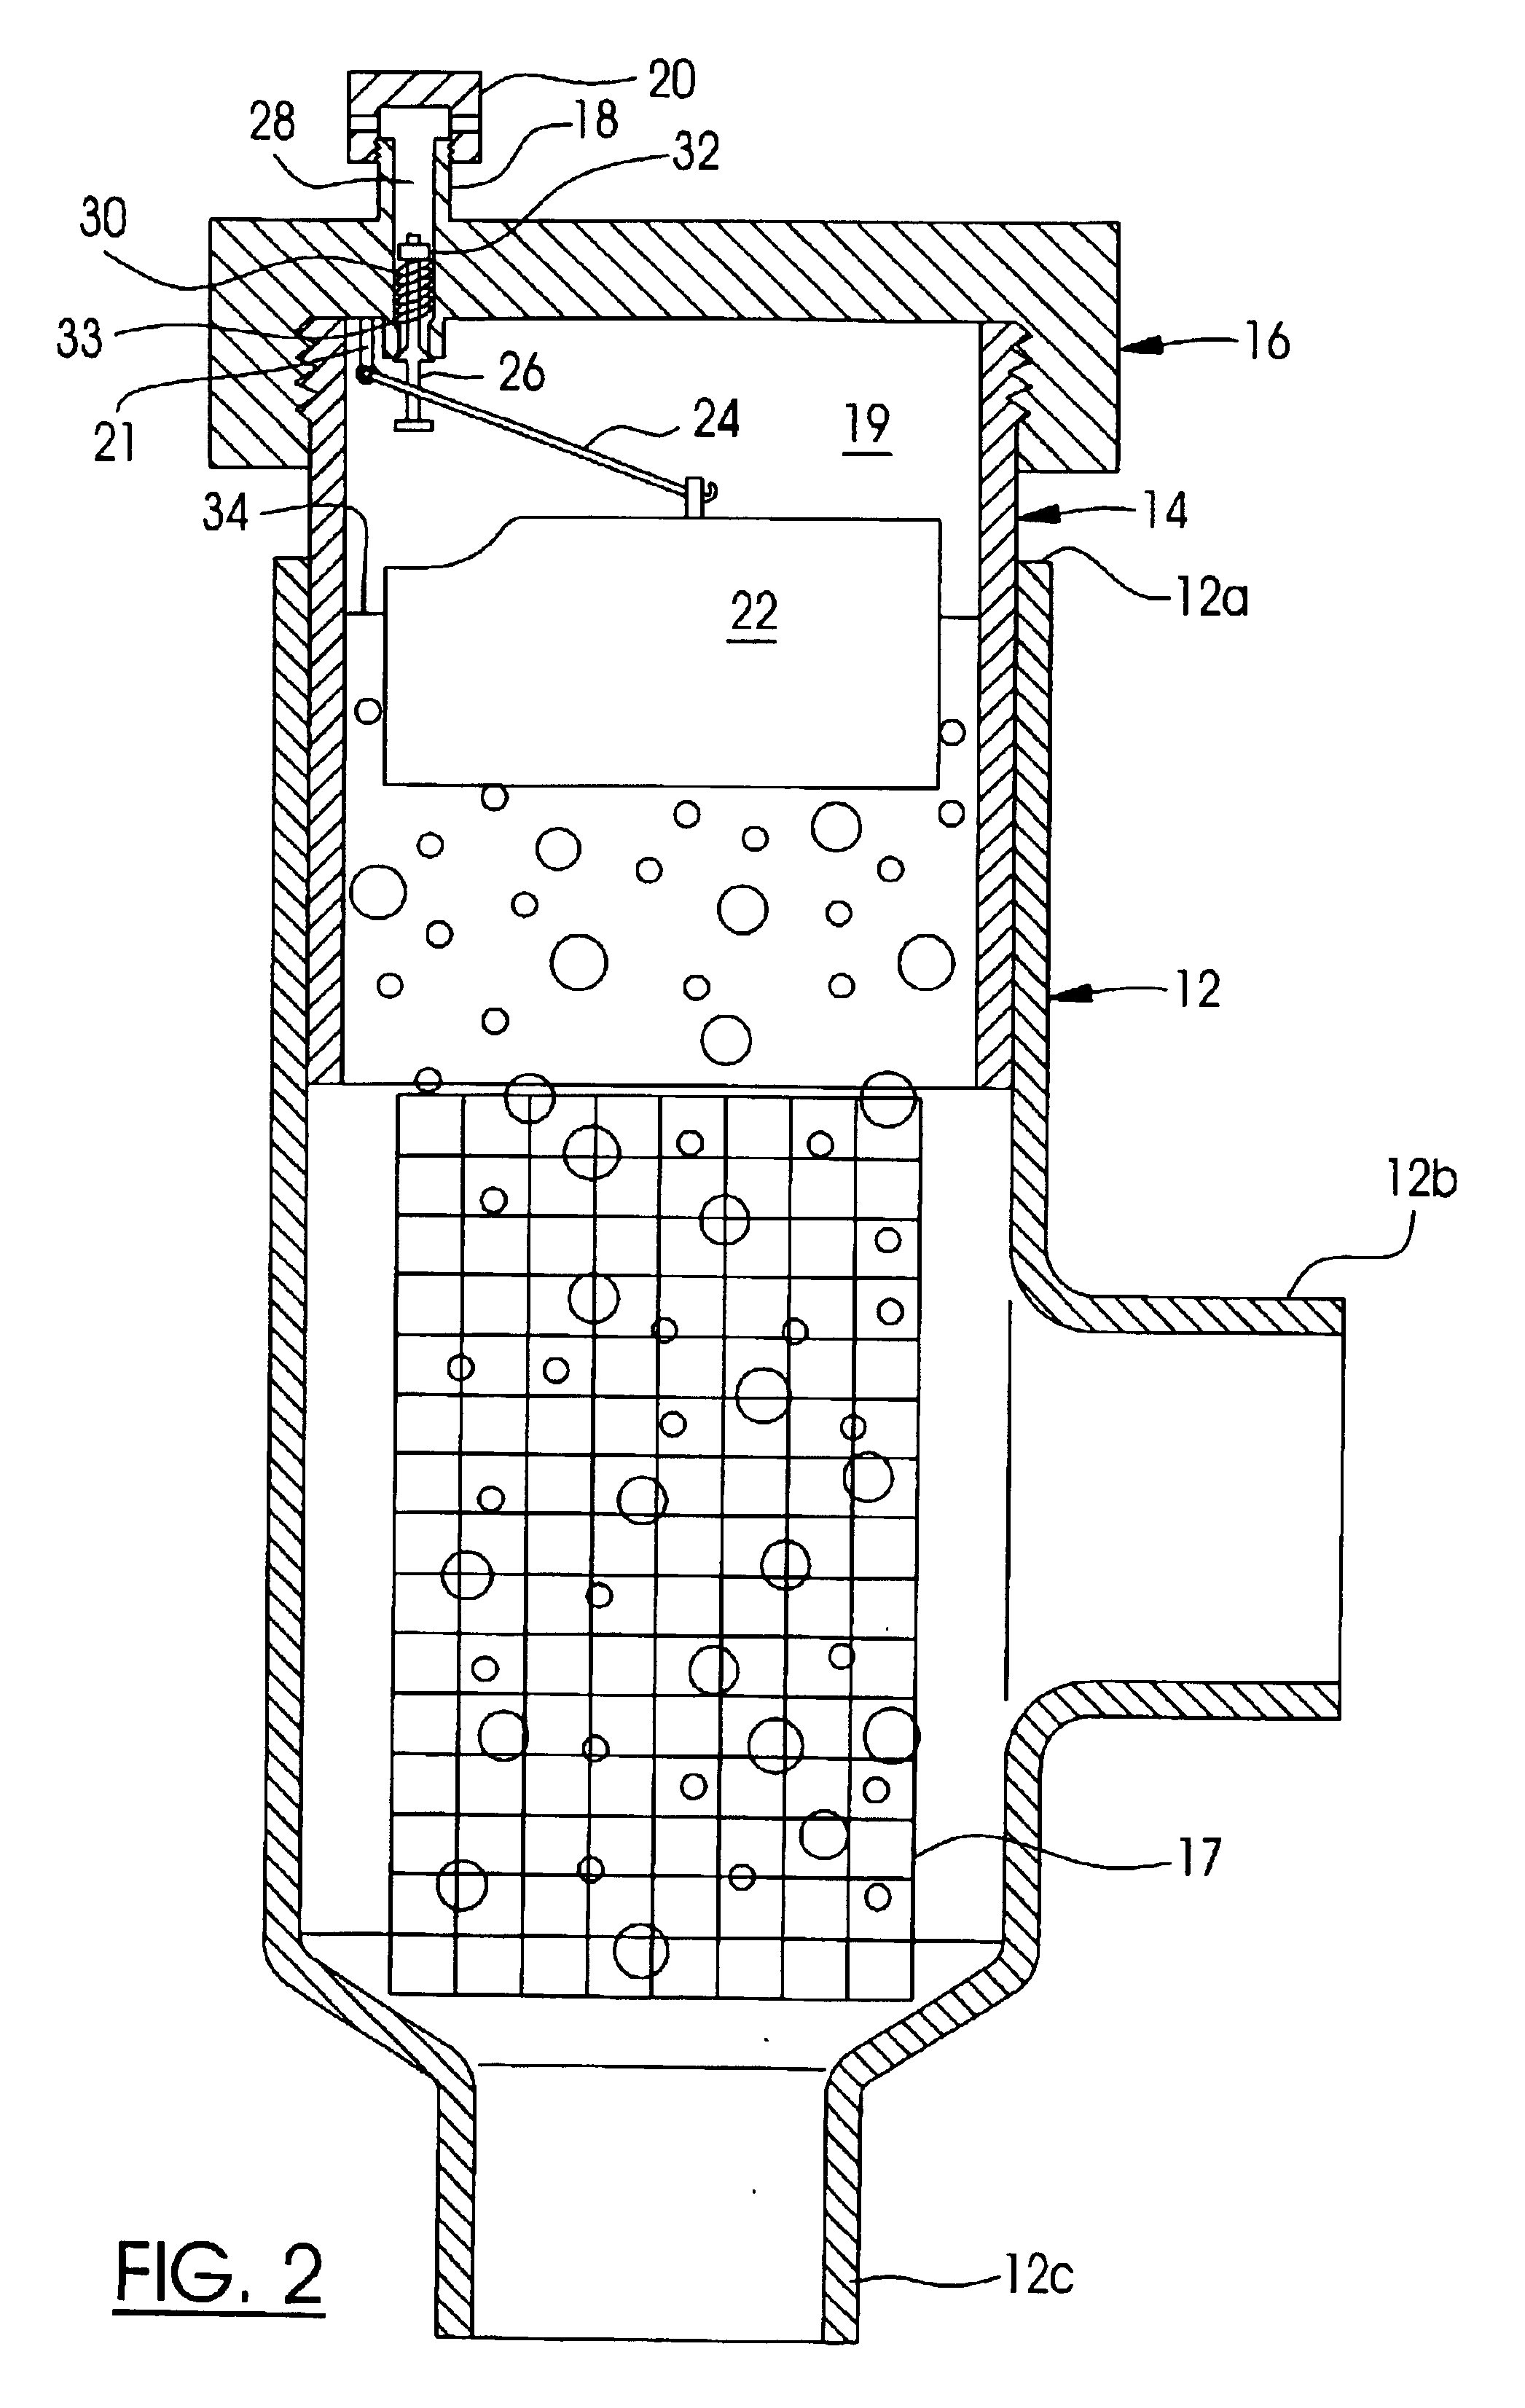 Method and kit for use with standard pipe couplings to construct a de-aerator